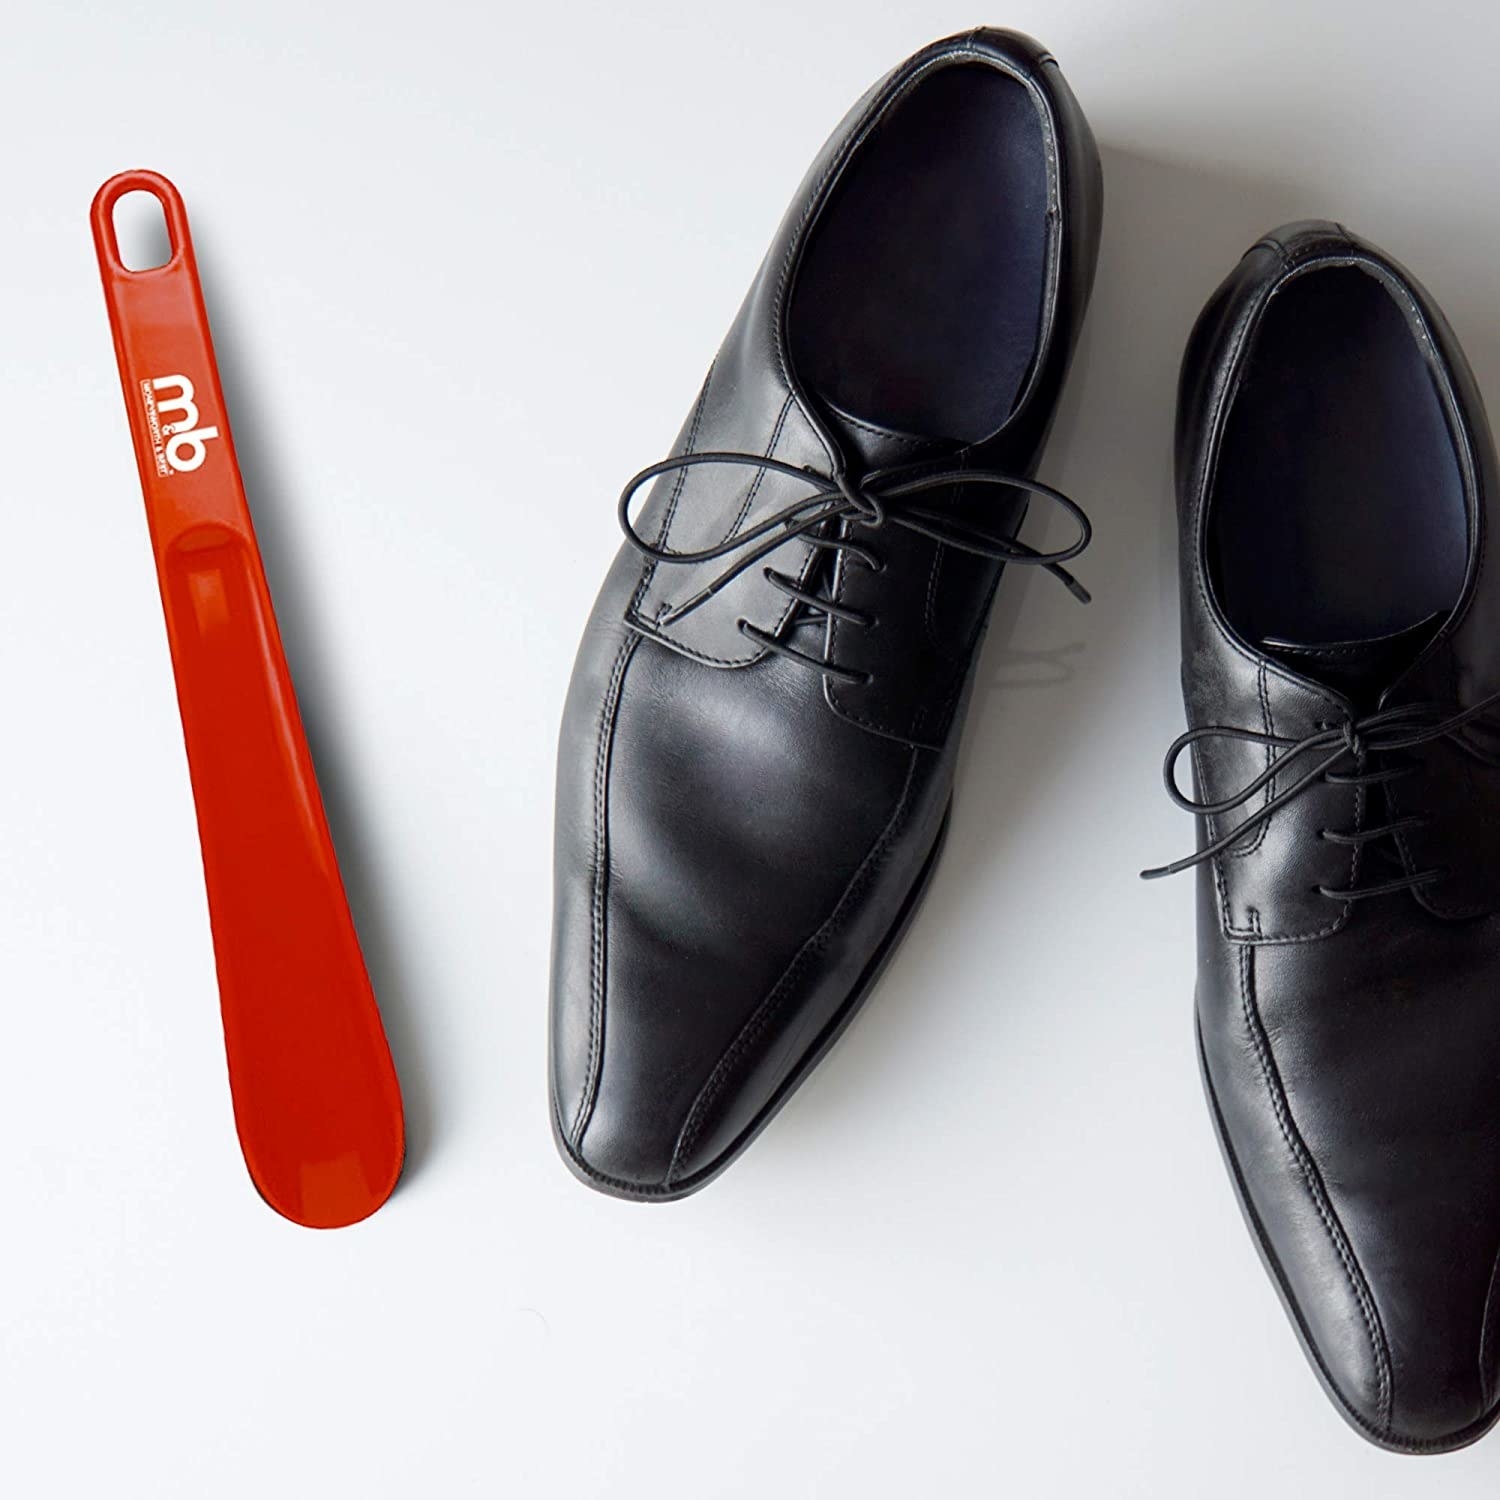 a shoe horn next to a pair of dress shoes